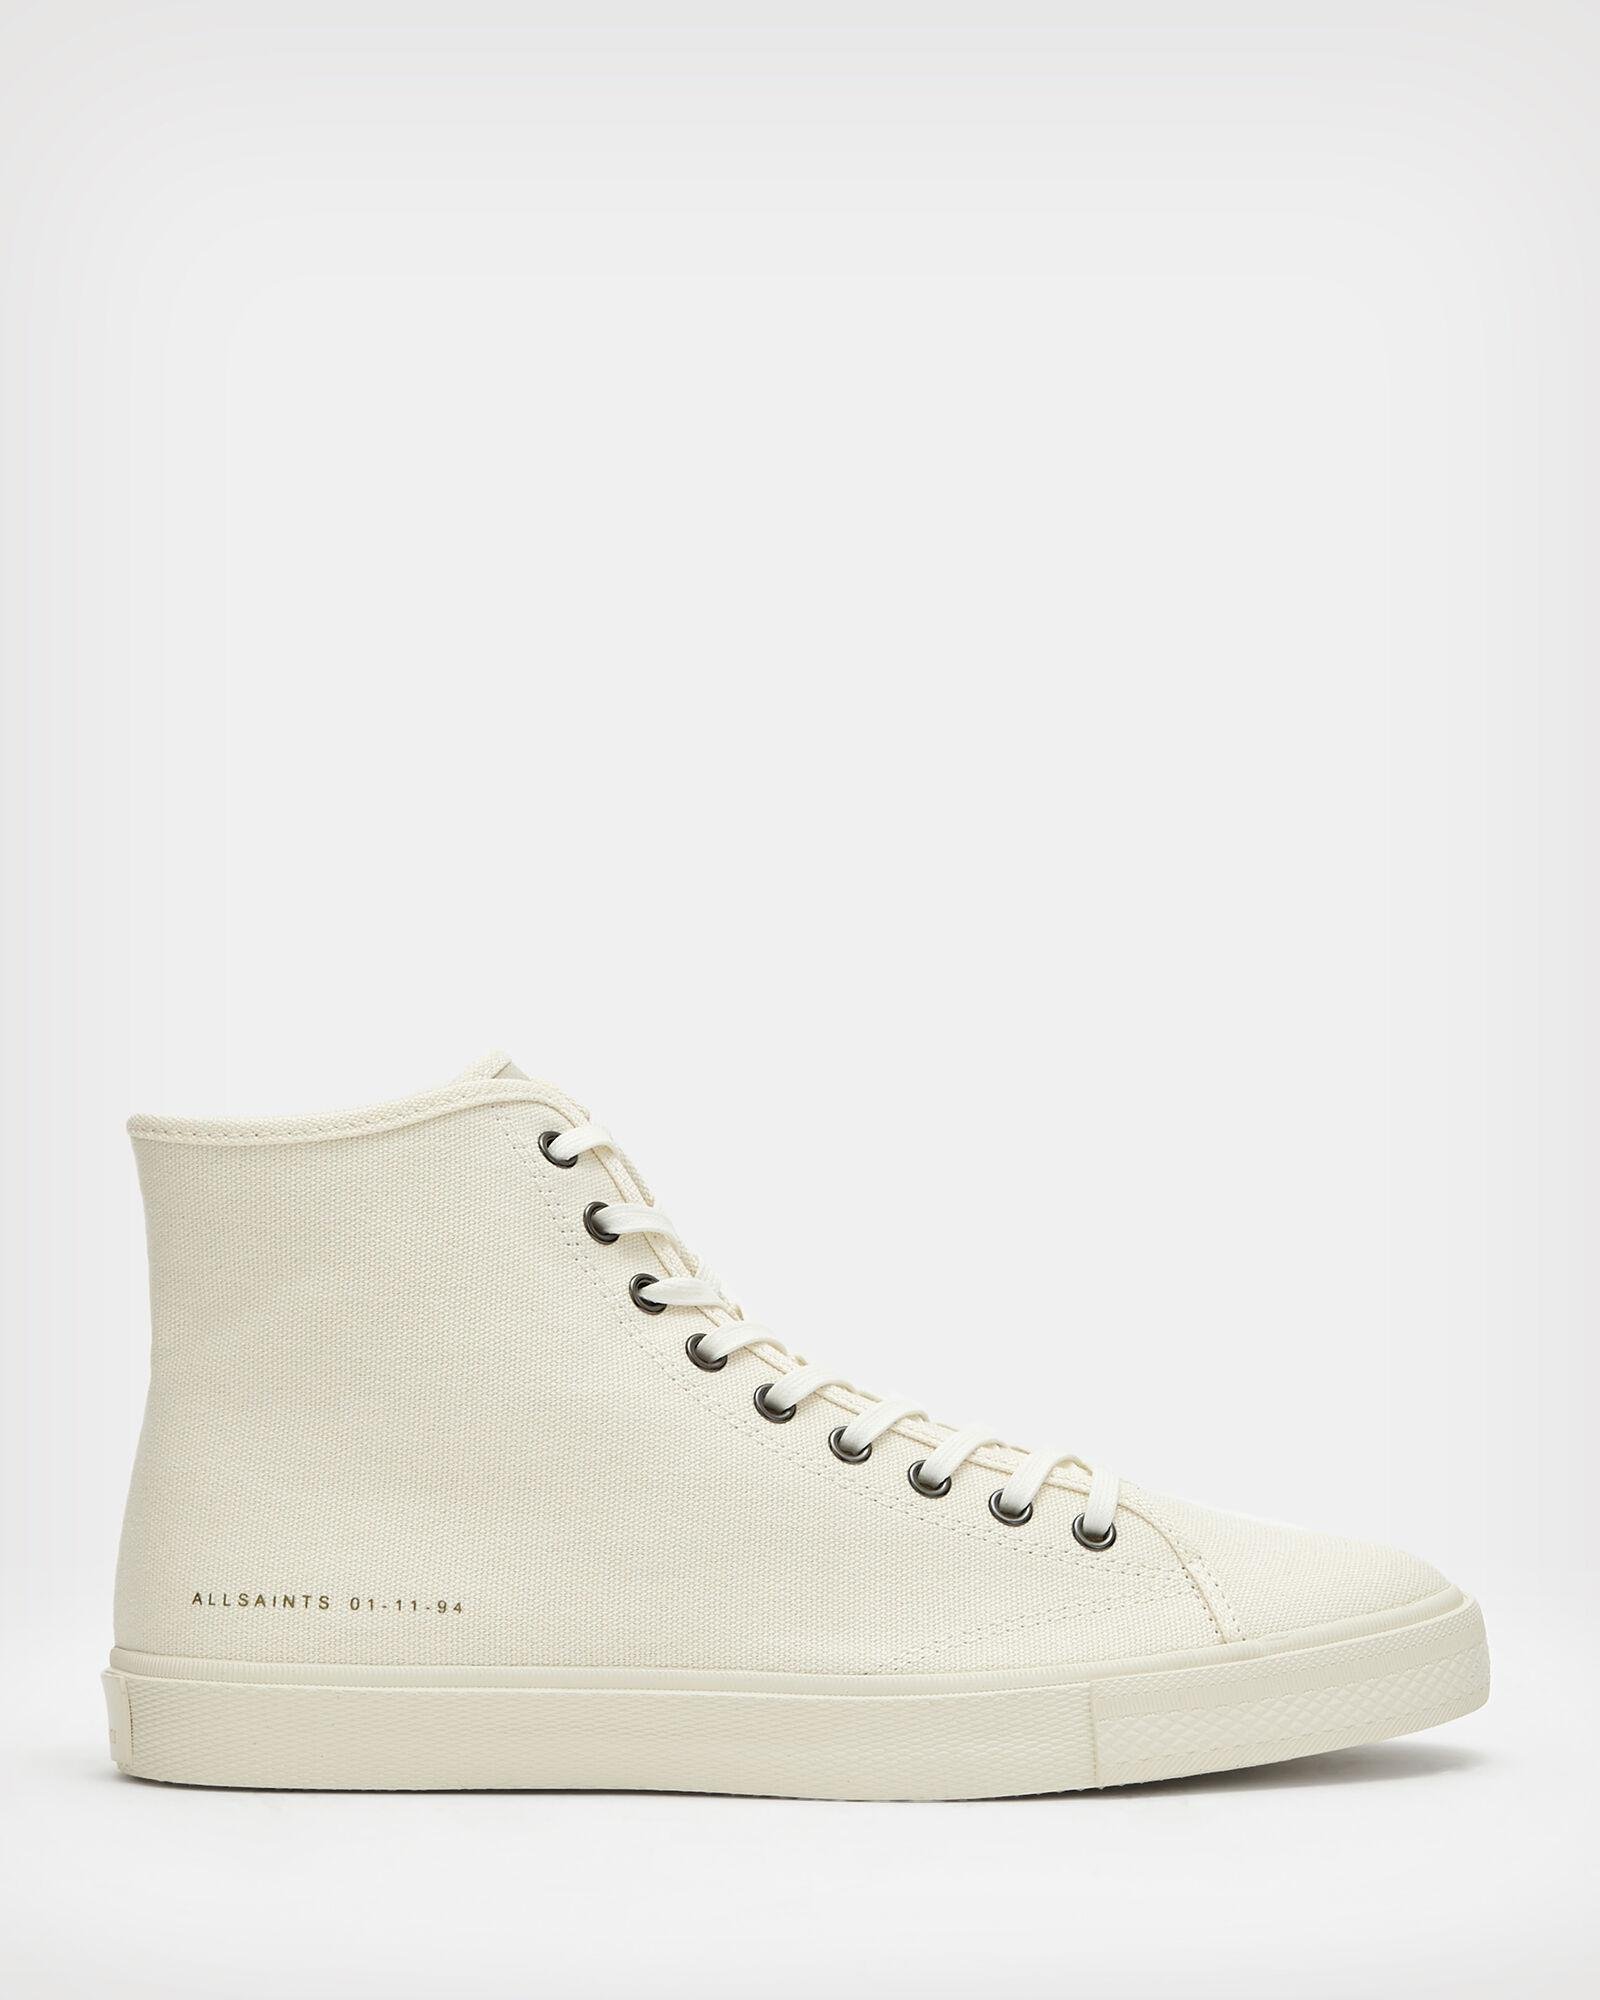 Bryce High Top Sneakers by ALLSAINTS